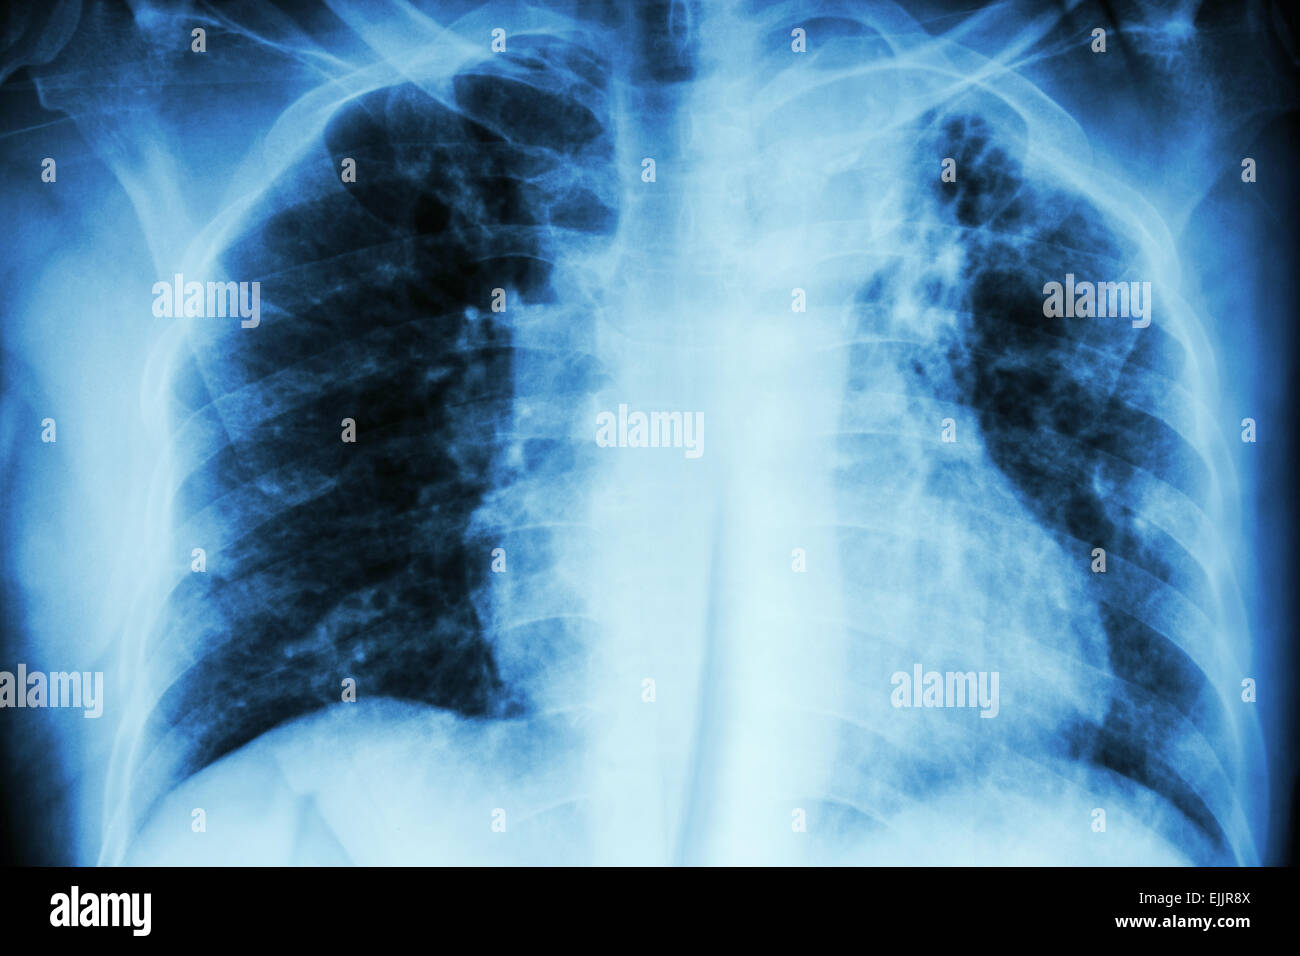 Pulmonary Tuberculosis .  Chest X-ray : interstitial infiltration at left upper lung due to Mycobacterium Tuberculosis infection Stock Photo